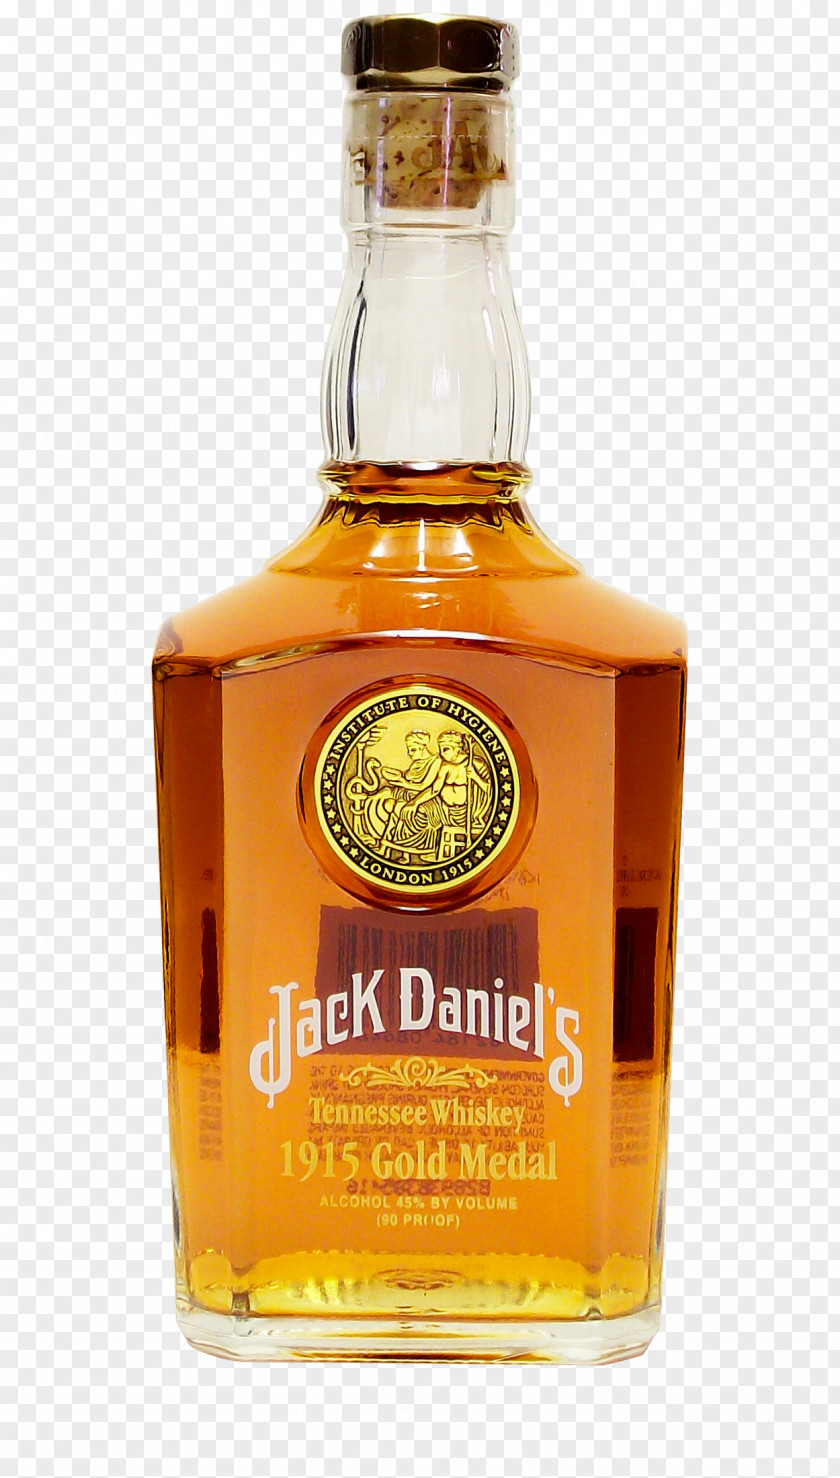 Bottle Tennessee Whiskey Jack Daniel's Bourbon Scotch Whisky PNG